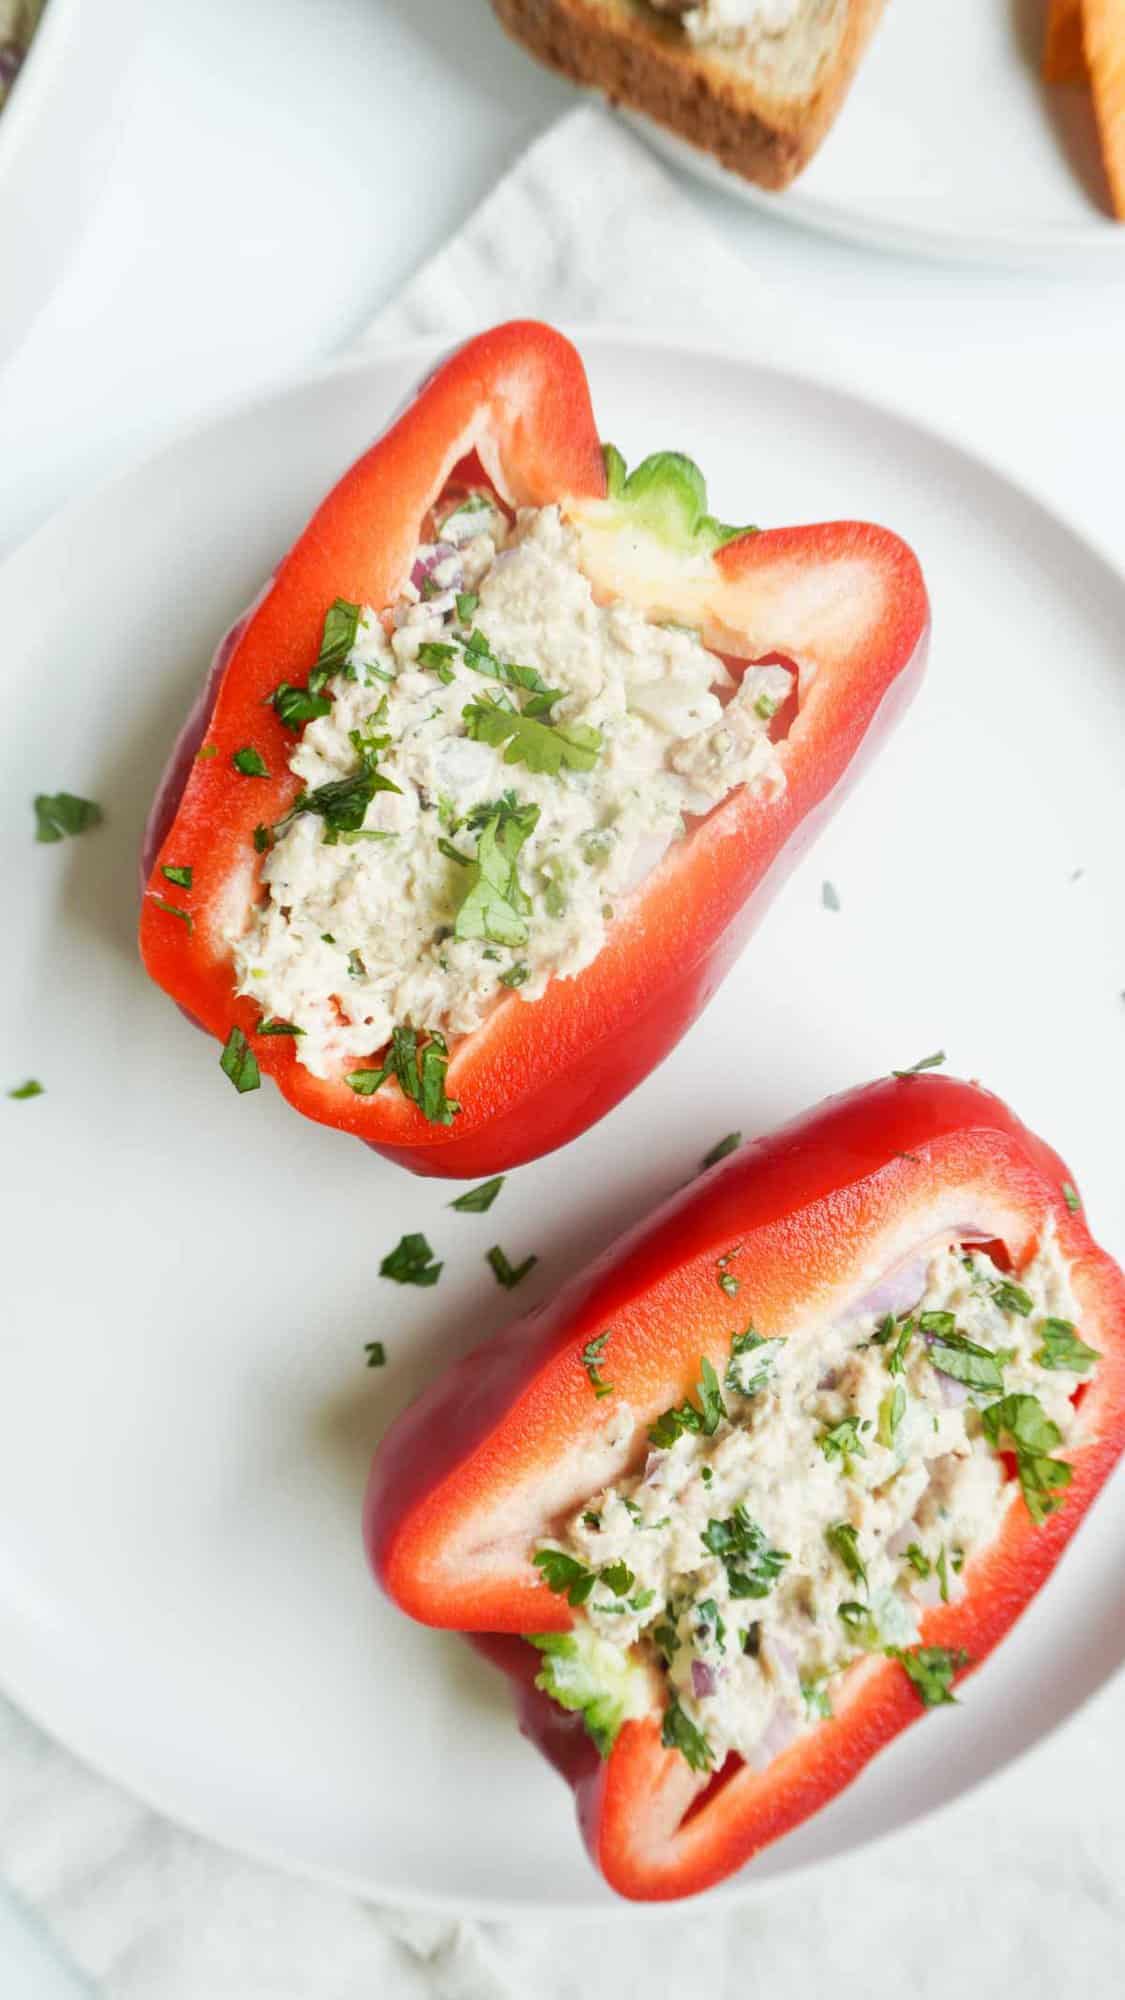 2 halves of red bell pepper stuffed with tuna salad on a plate